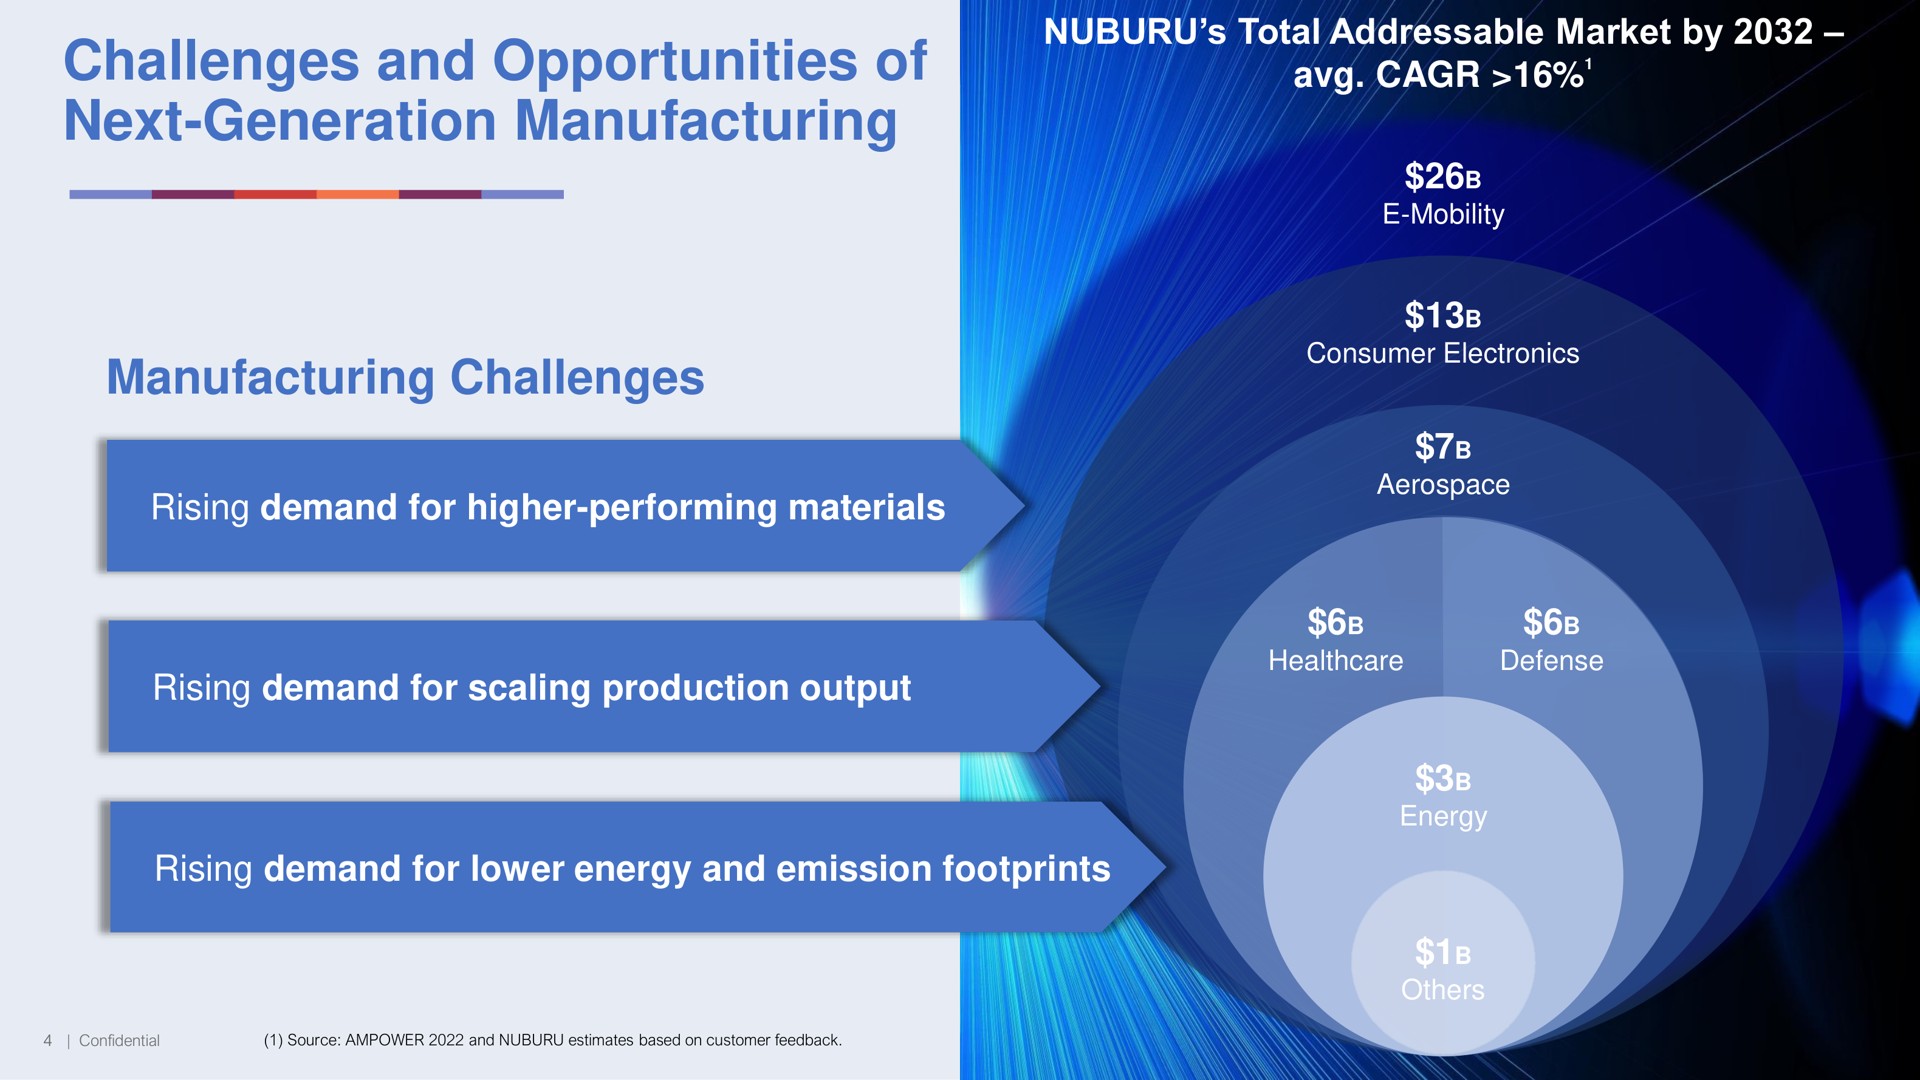 challenges and opportunities of next generation manufacturing total market by manufacturing challenges rising demand for higher performing materials rising demand for scaling production output rising demand for lower energy and emission footprints ado as site i | NUBURU